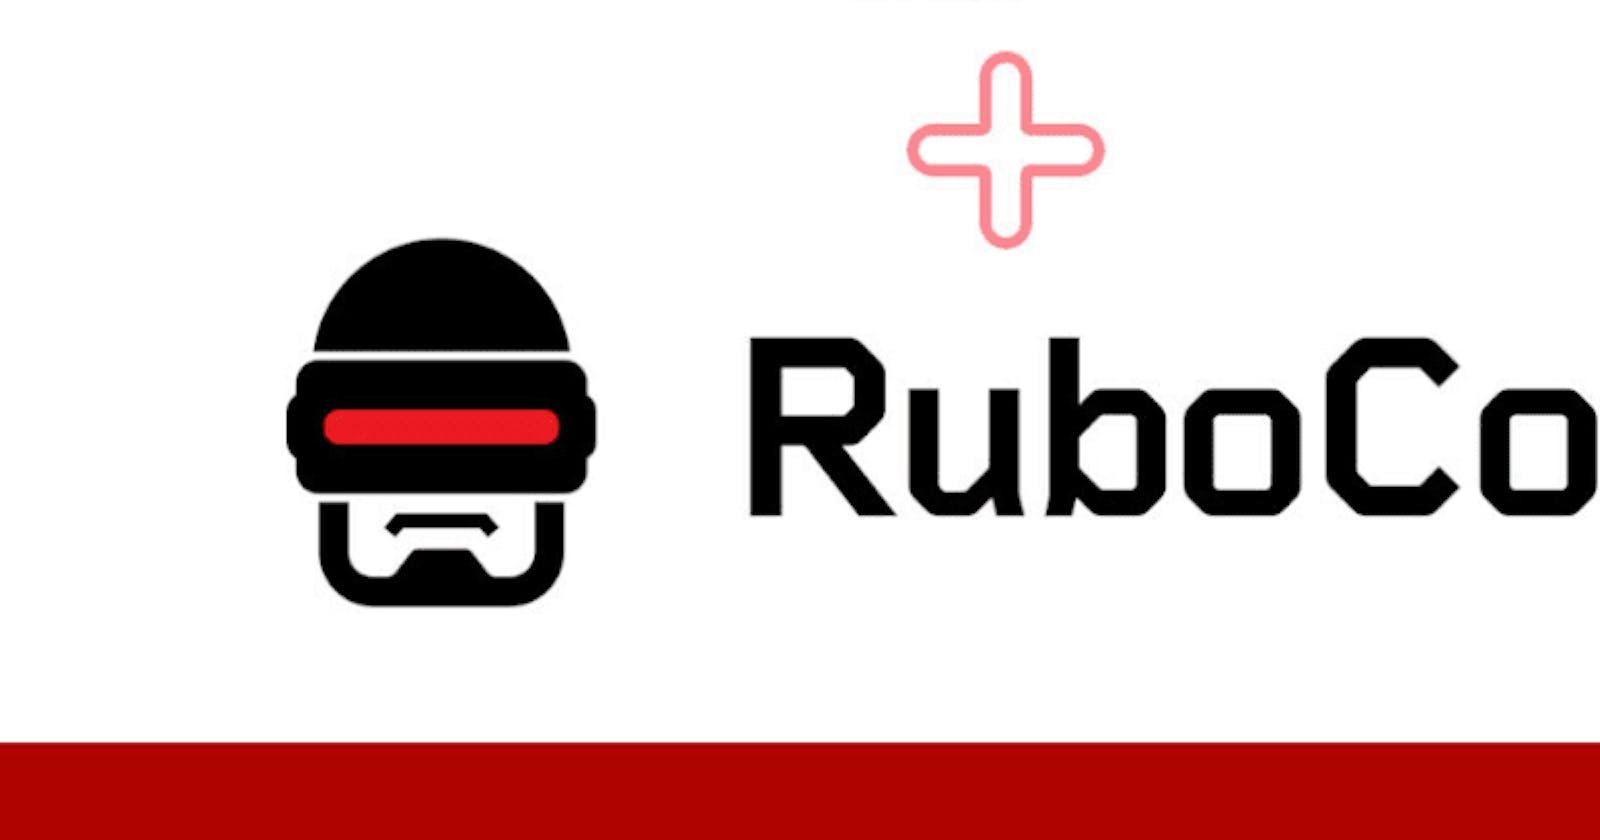 RuboCop: How to install and configure